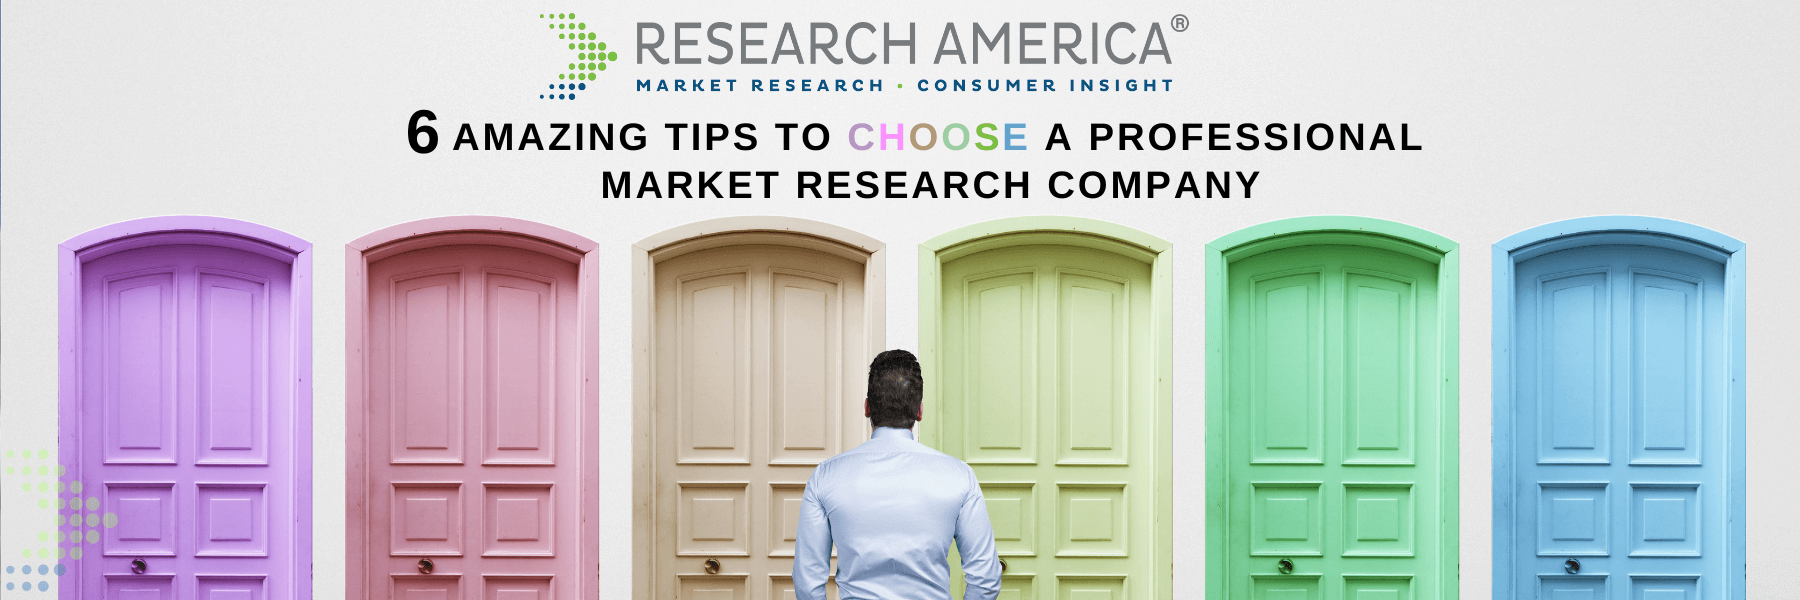 Discover 6 tips to choose a market research company and make an informed decision for your needs.